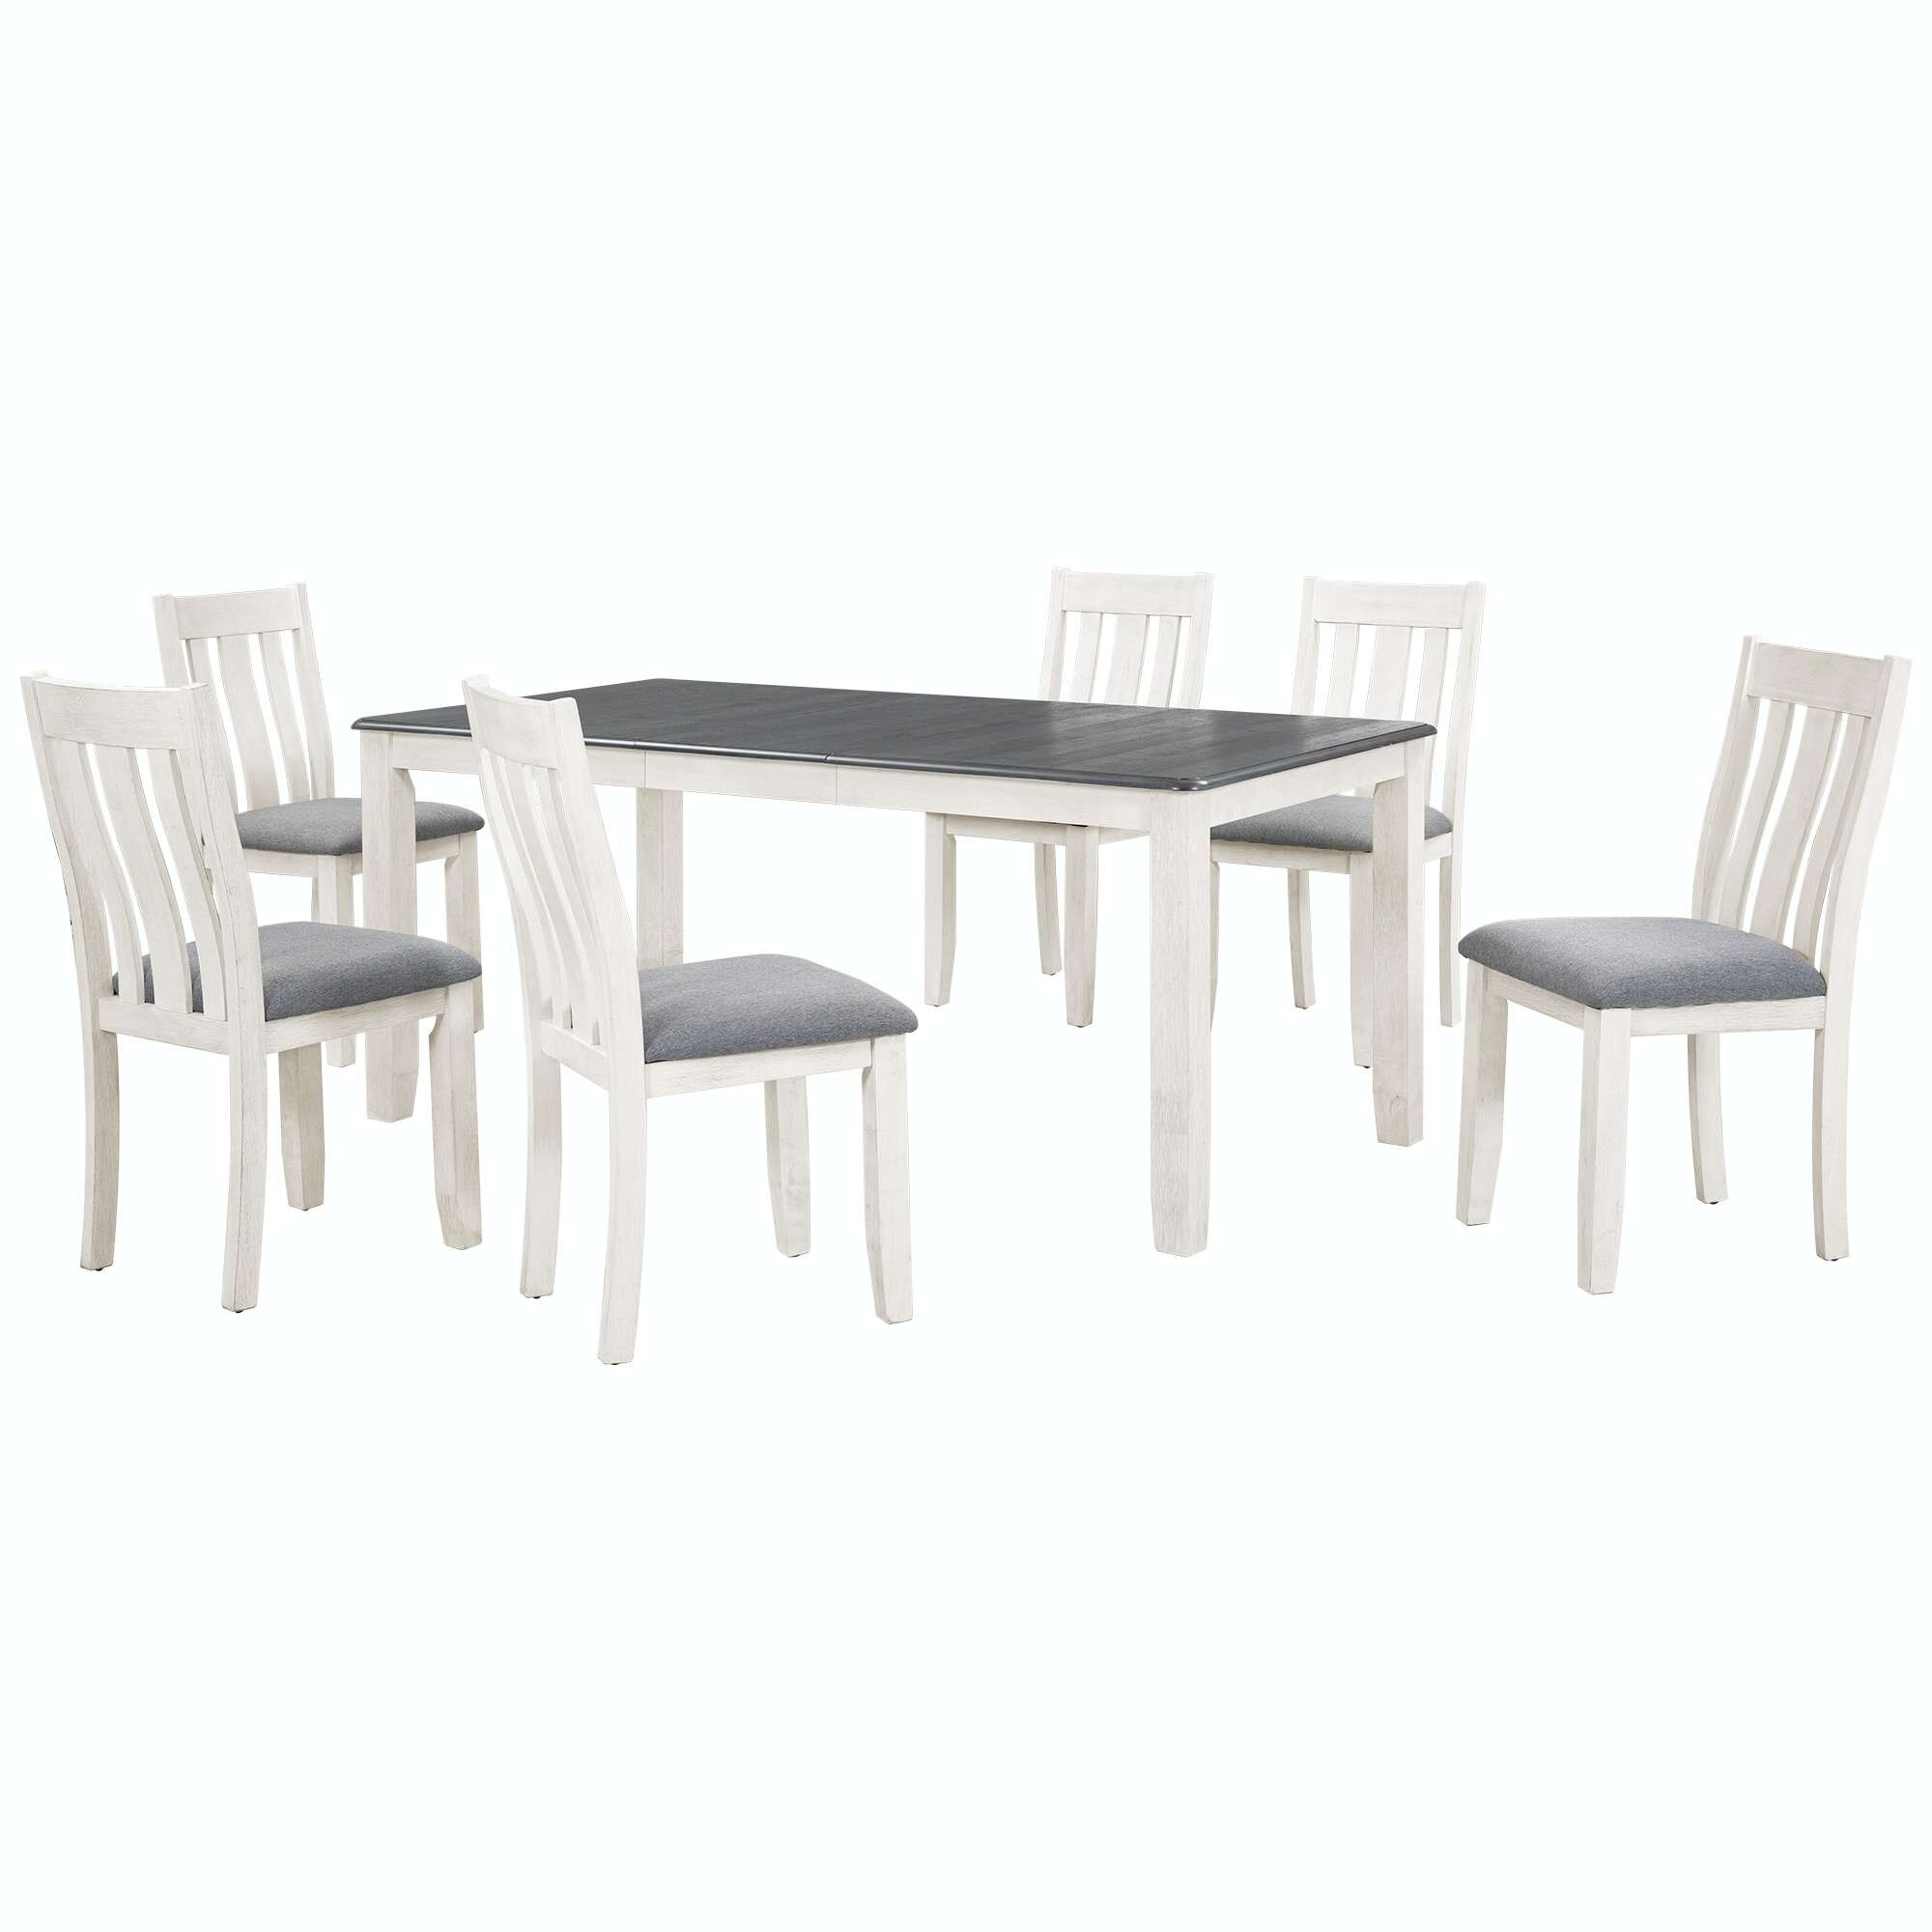 Retro 7-Piece Dining Set: Extendable Table and 6 Upholstered Chairs in Classic Style